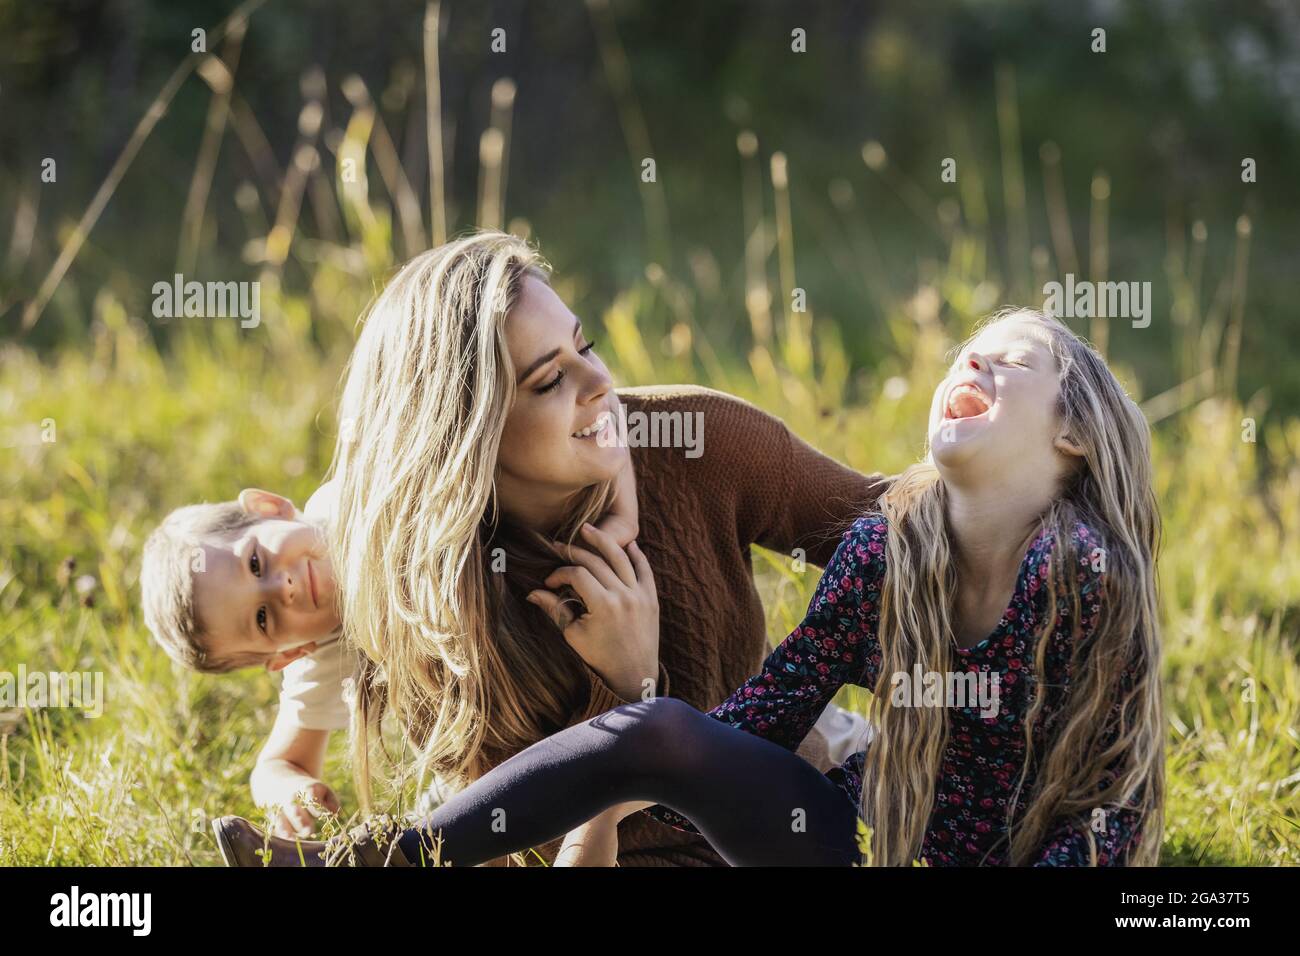 A mother and her young children spending quality time together in a city park during the fall season; Edmonton, Alberta, Canada Stock Photo